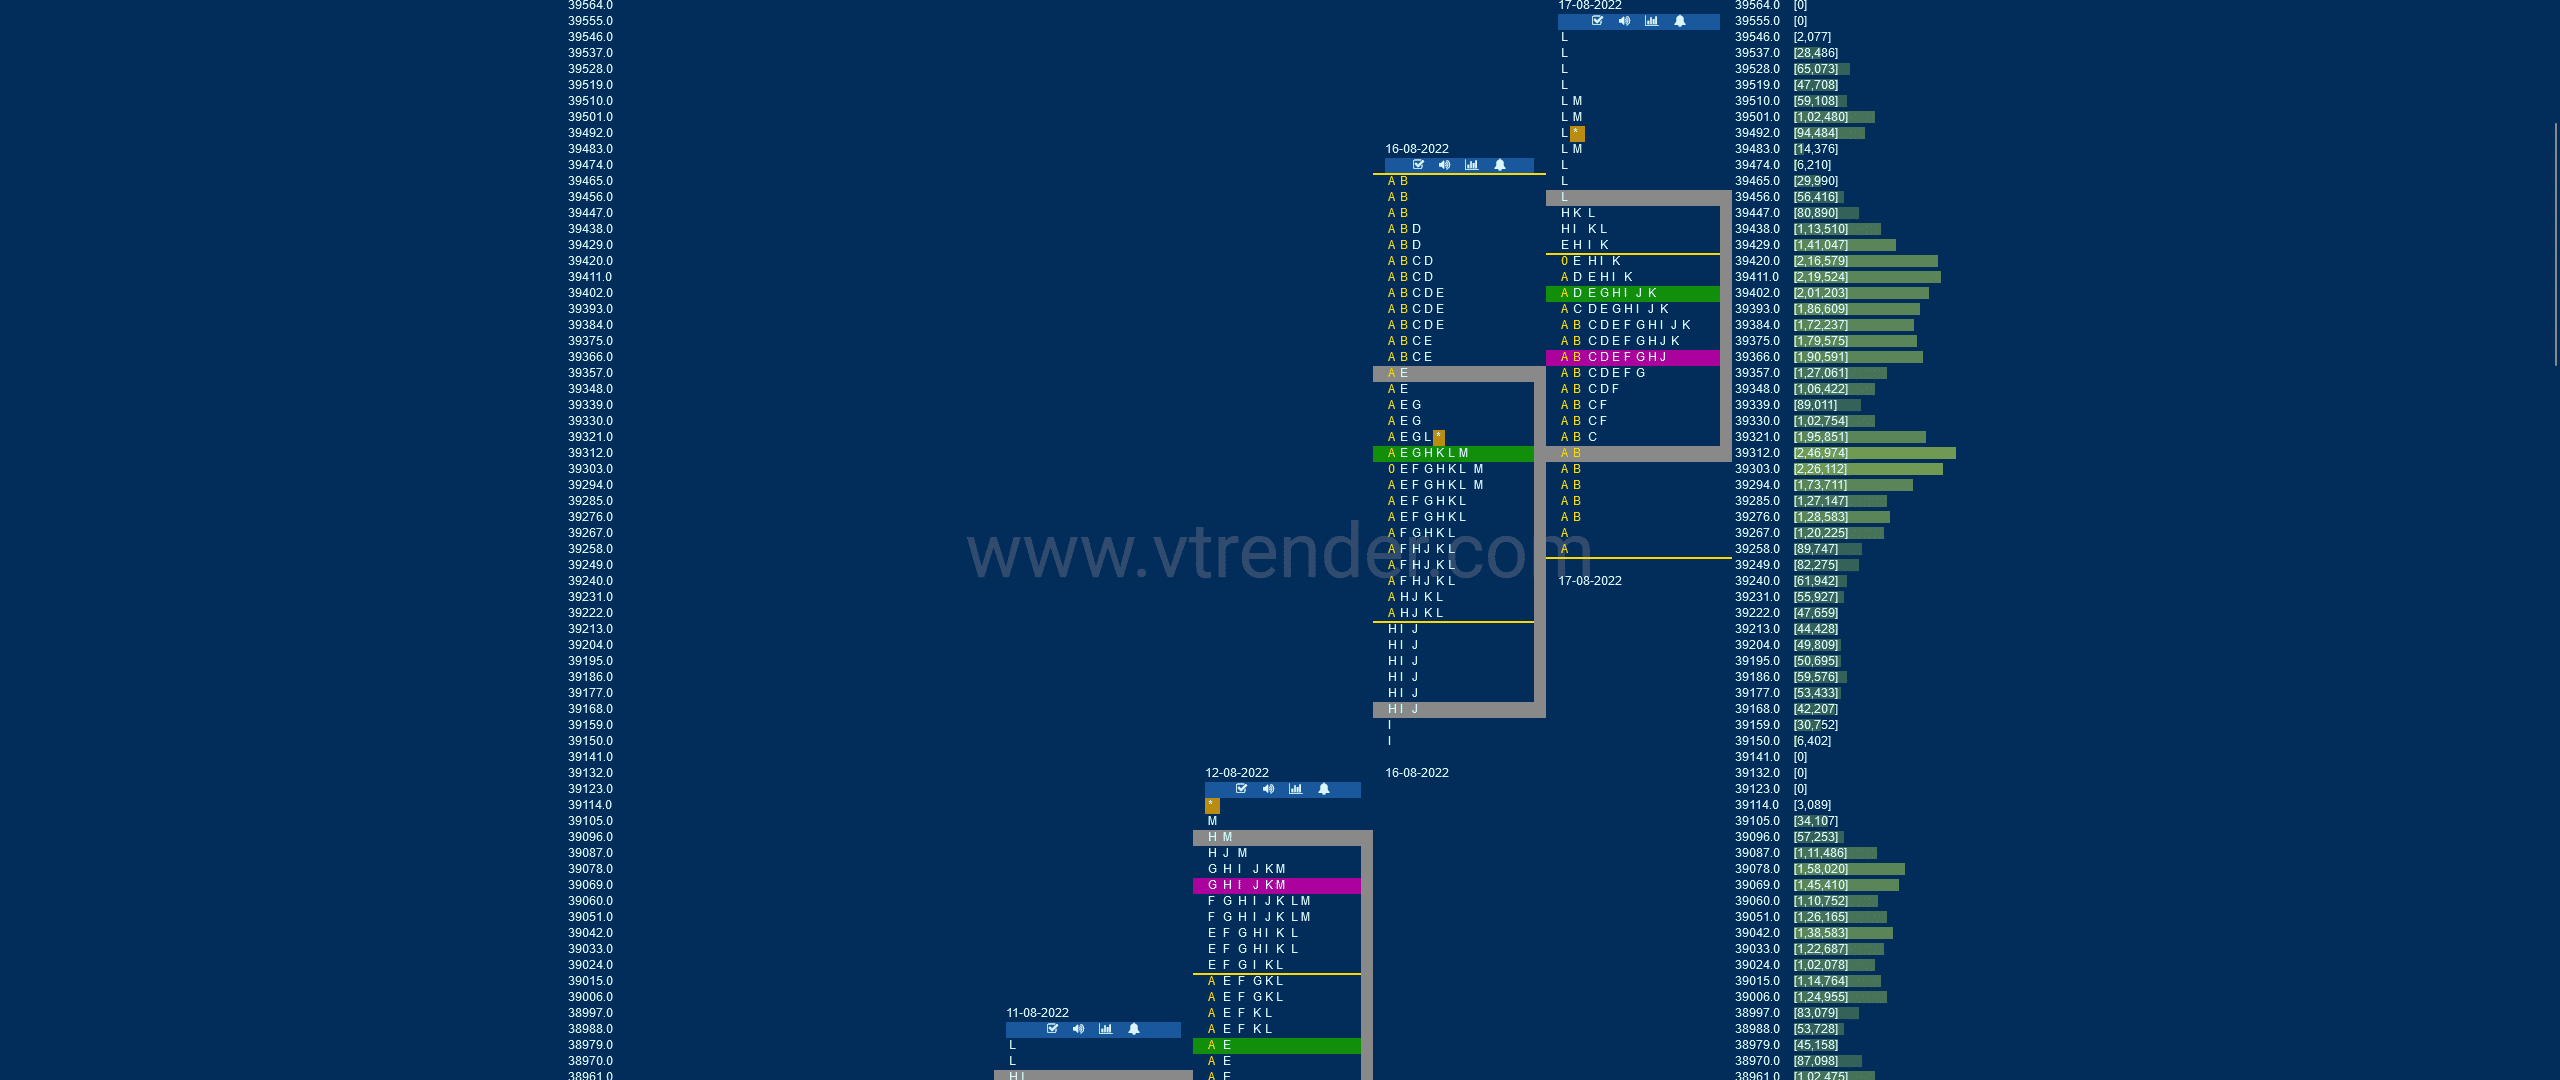 Bnf 11 Market Profile Analysis Dated 17Th Aug 2022 Banknifty Futures, Charts, Day Trading, Intraday Trading, Intraday Trading Strategies, Market Profile, Market Profile Trading Strategies, Nifty Futures, Order Flow Analysis, Support And Resistance, Technical Analysis, Trading Strategies, Volume Profile Trading